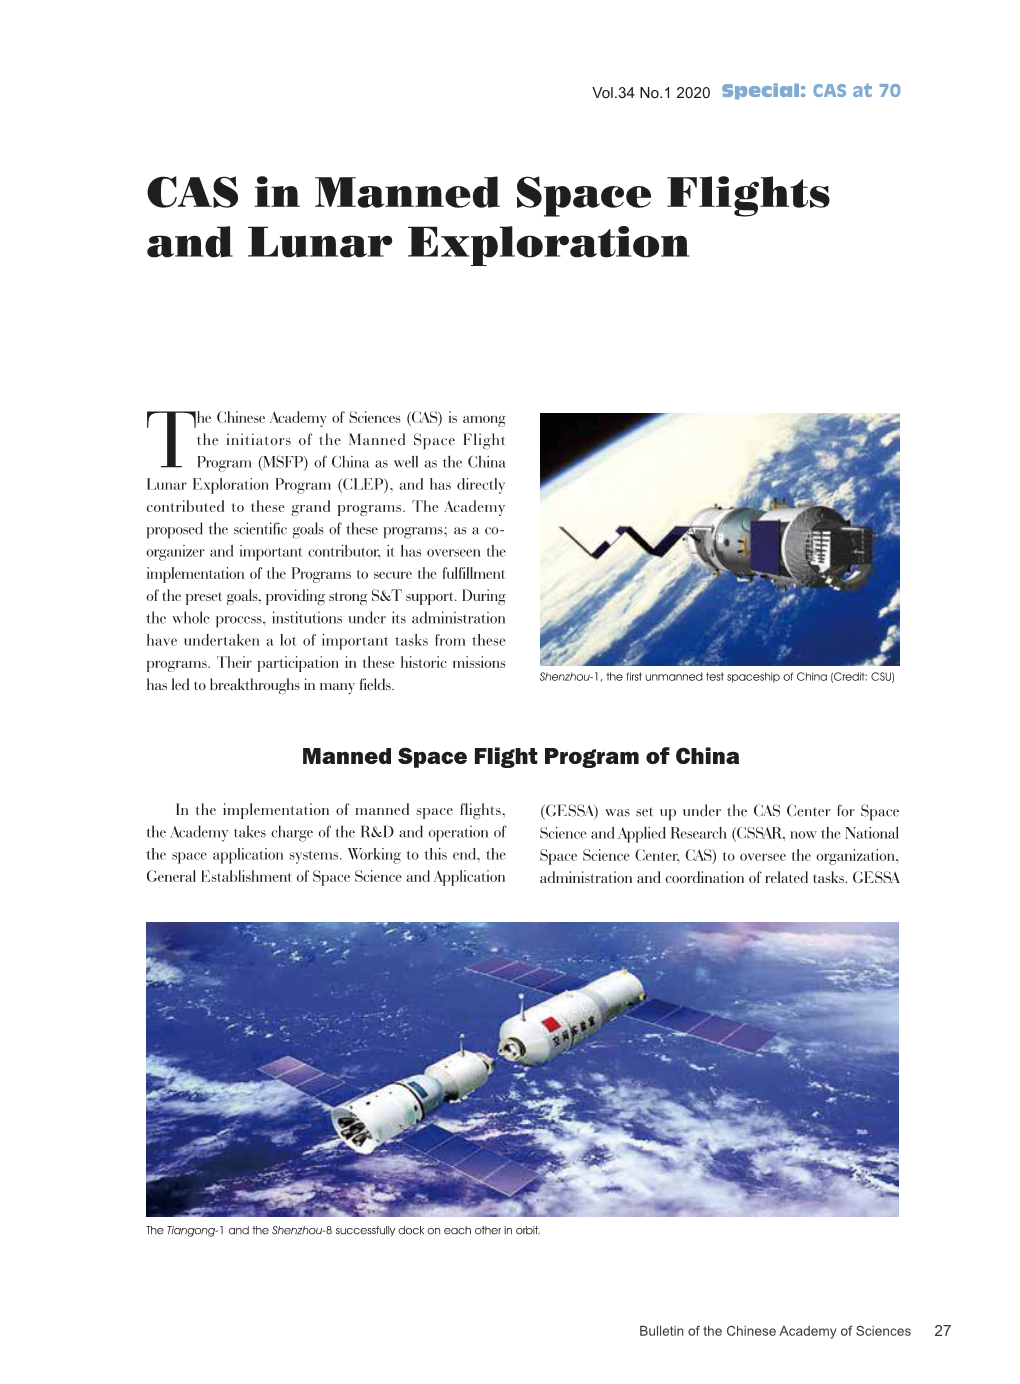 CAS in Manned Space Flights and Lunar Exploration